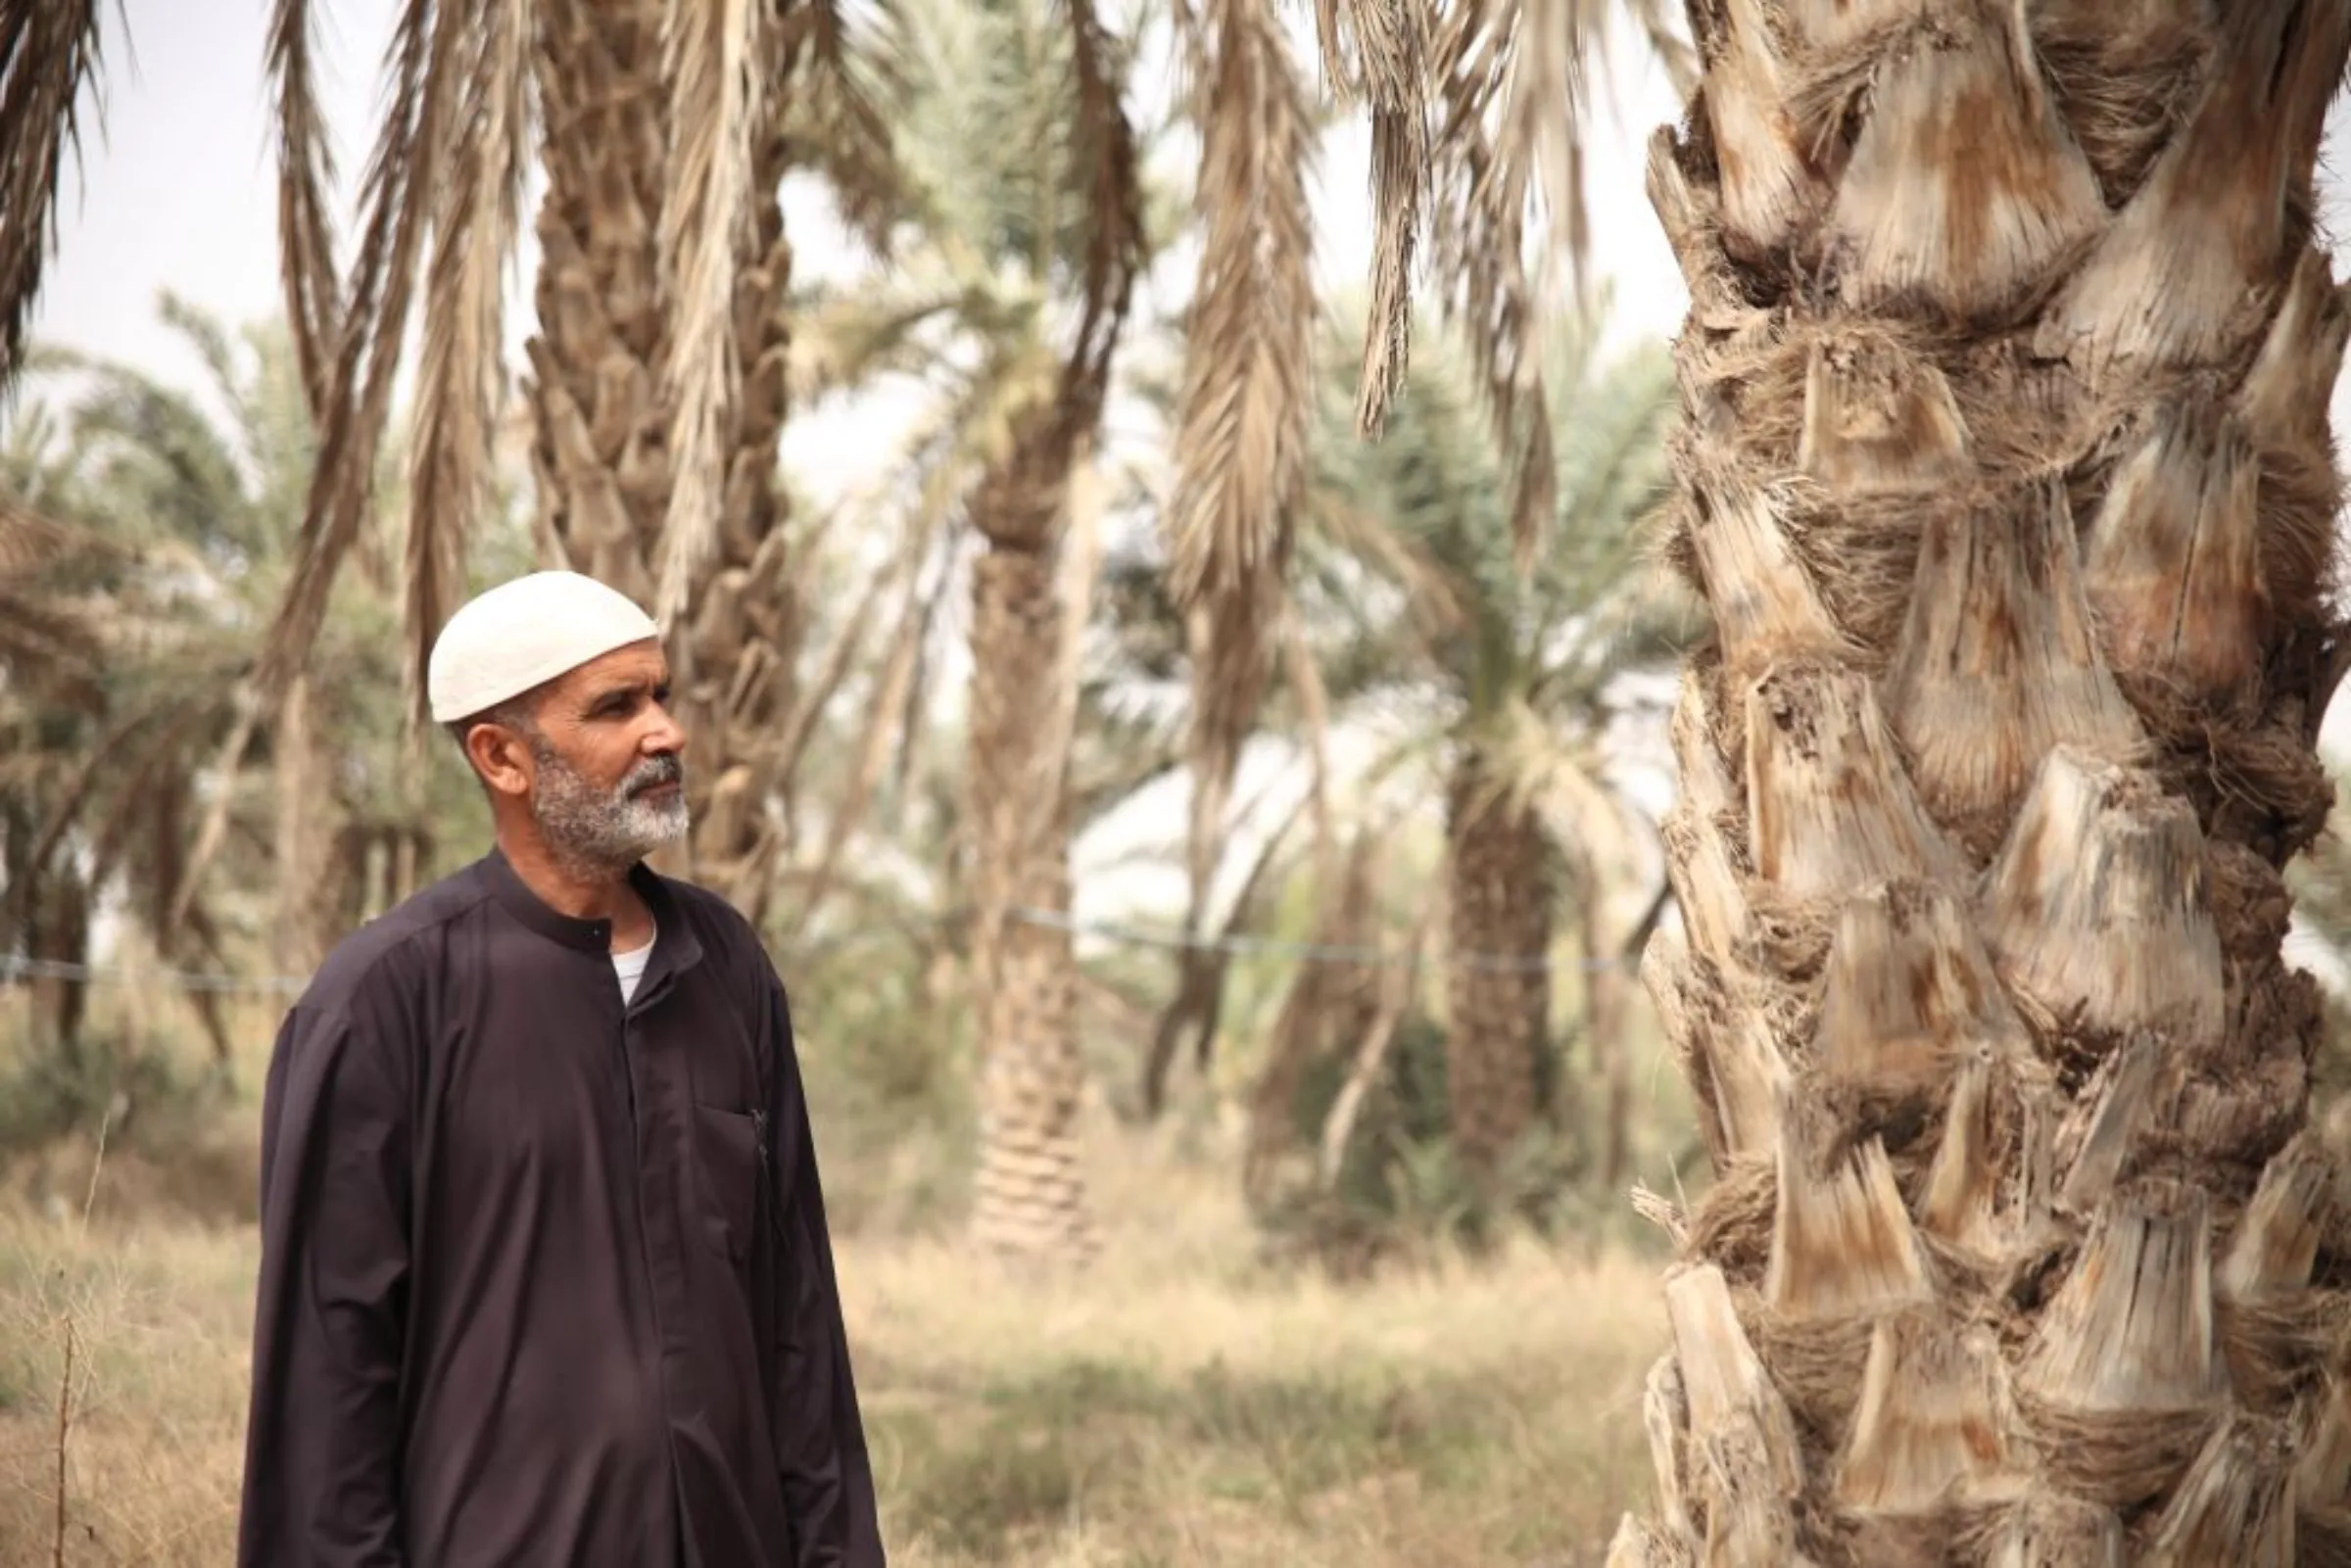 Farmer Qasim Abdul Wahad looks at one of his date palms which are struggling due to salination and lack of water near the village of Abu Al-Khaseeb in southern Iraq’s Basra governorate, March 6, 2022